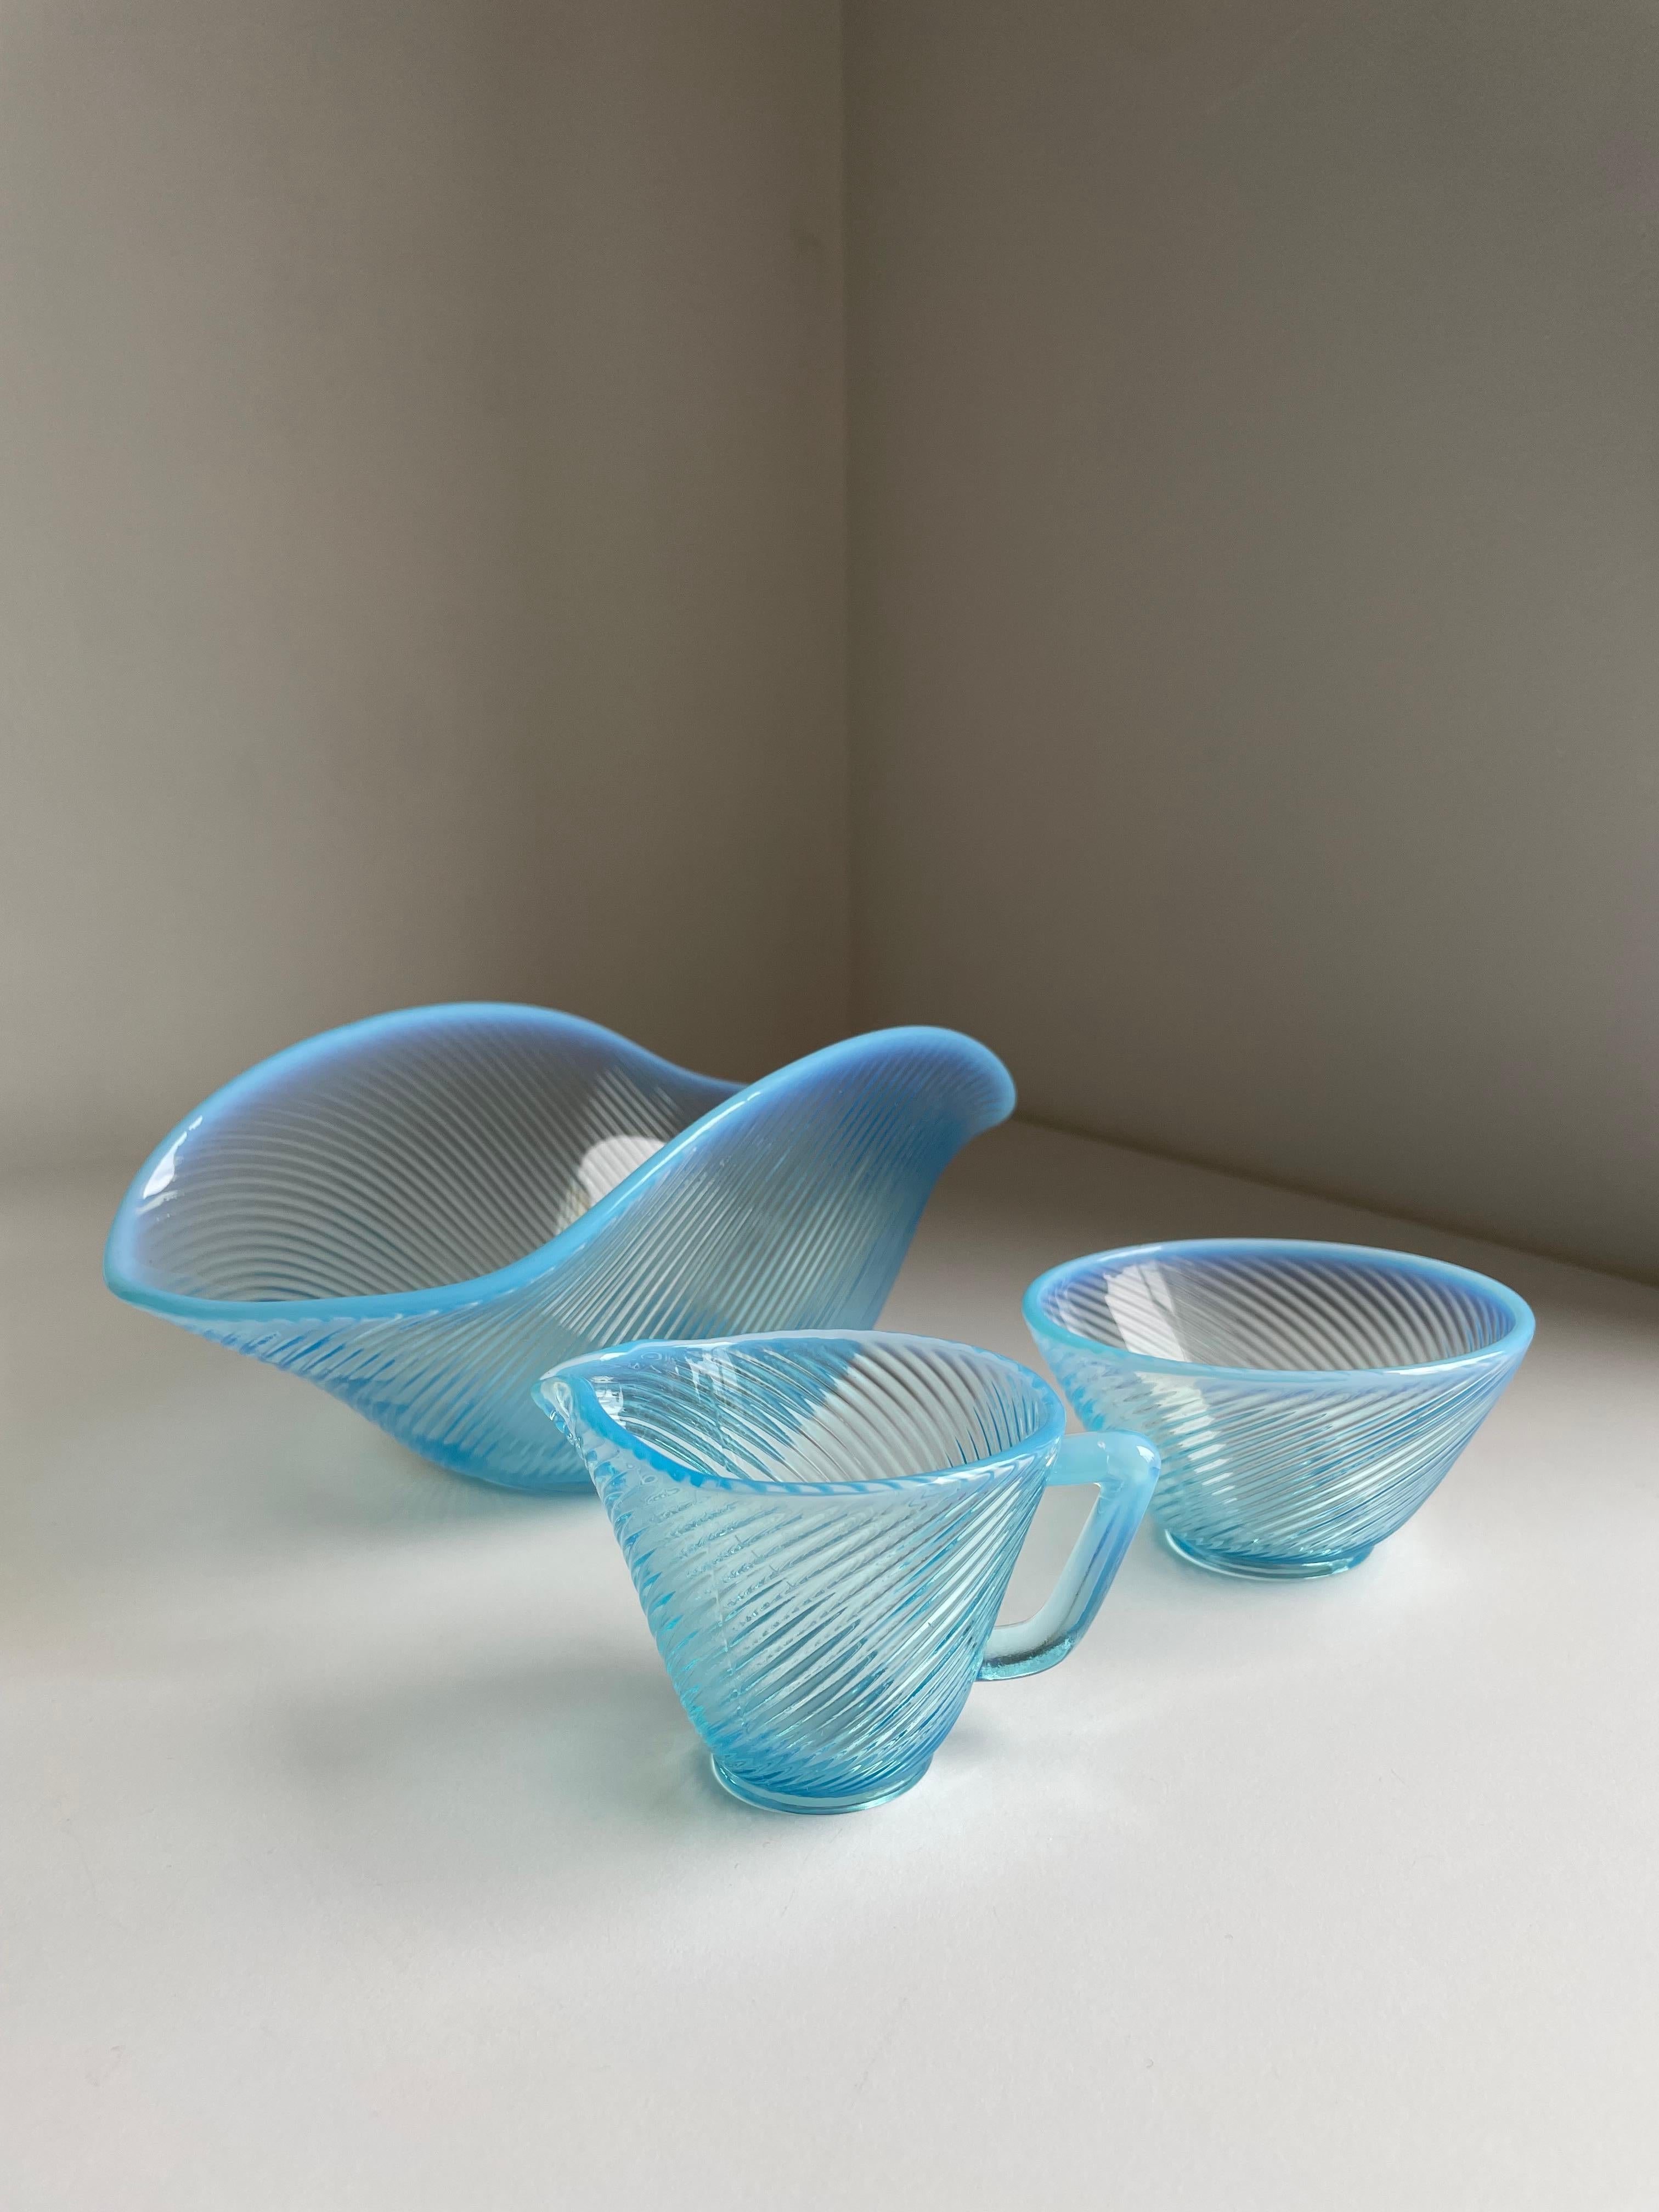 Swedish midcentury modern light blue glass milk and sugar set. Delicate sky blue tinted textured glass bowl from the Reffla series (reffla is Swedish for grooves) designed by Arthur Percy in 1952. White and light blue opalescent glass constitutes